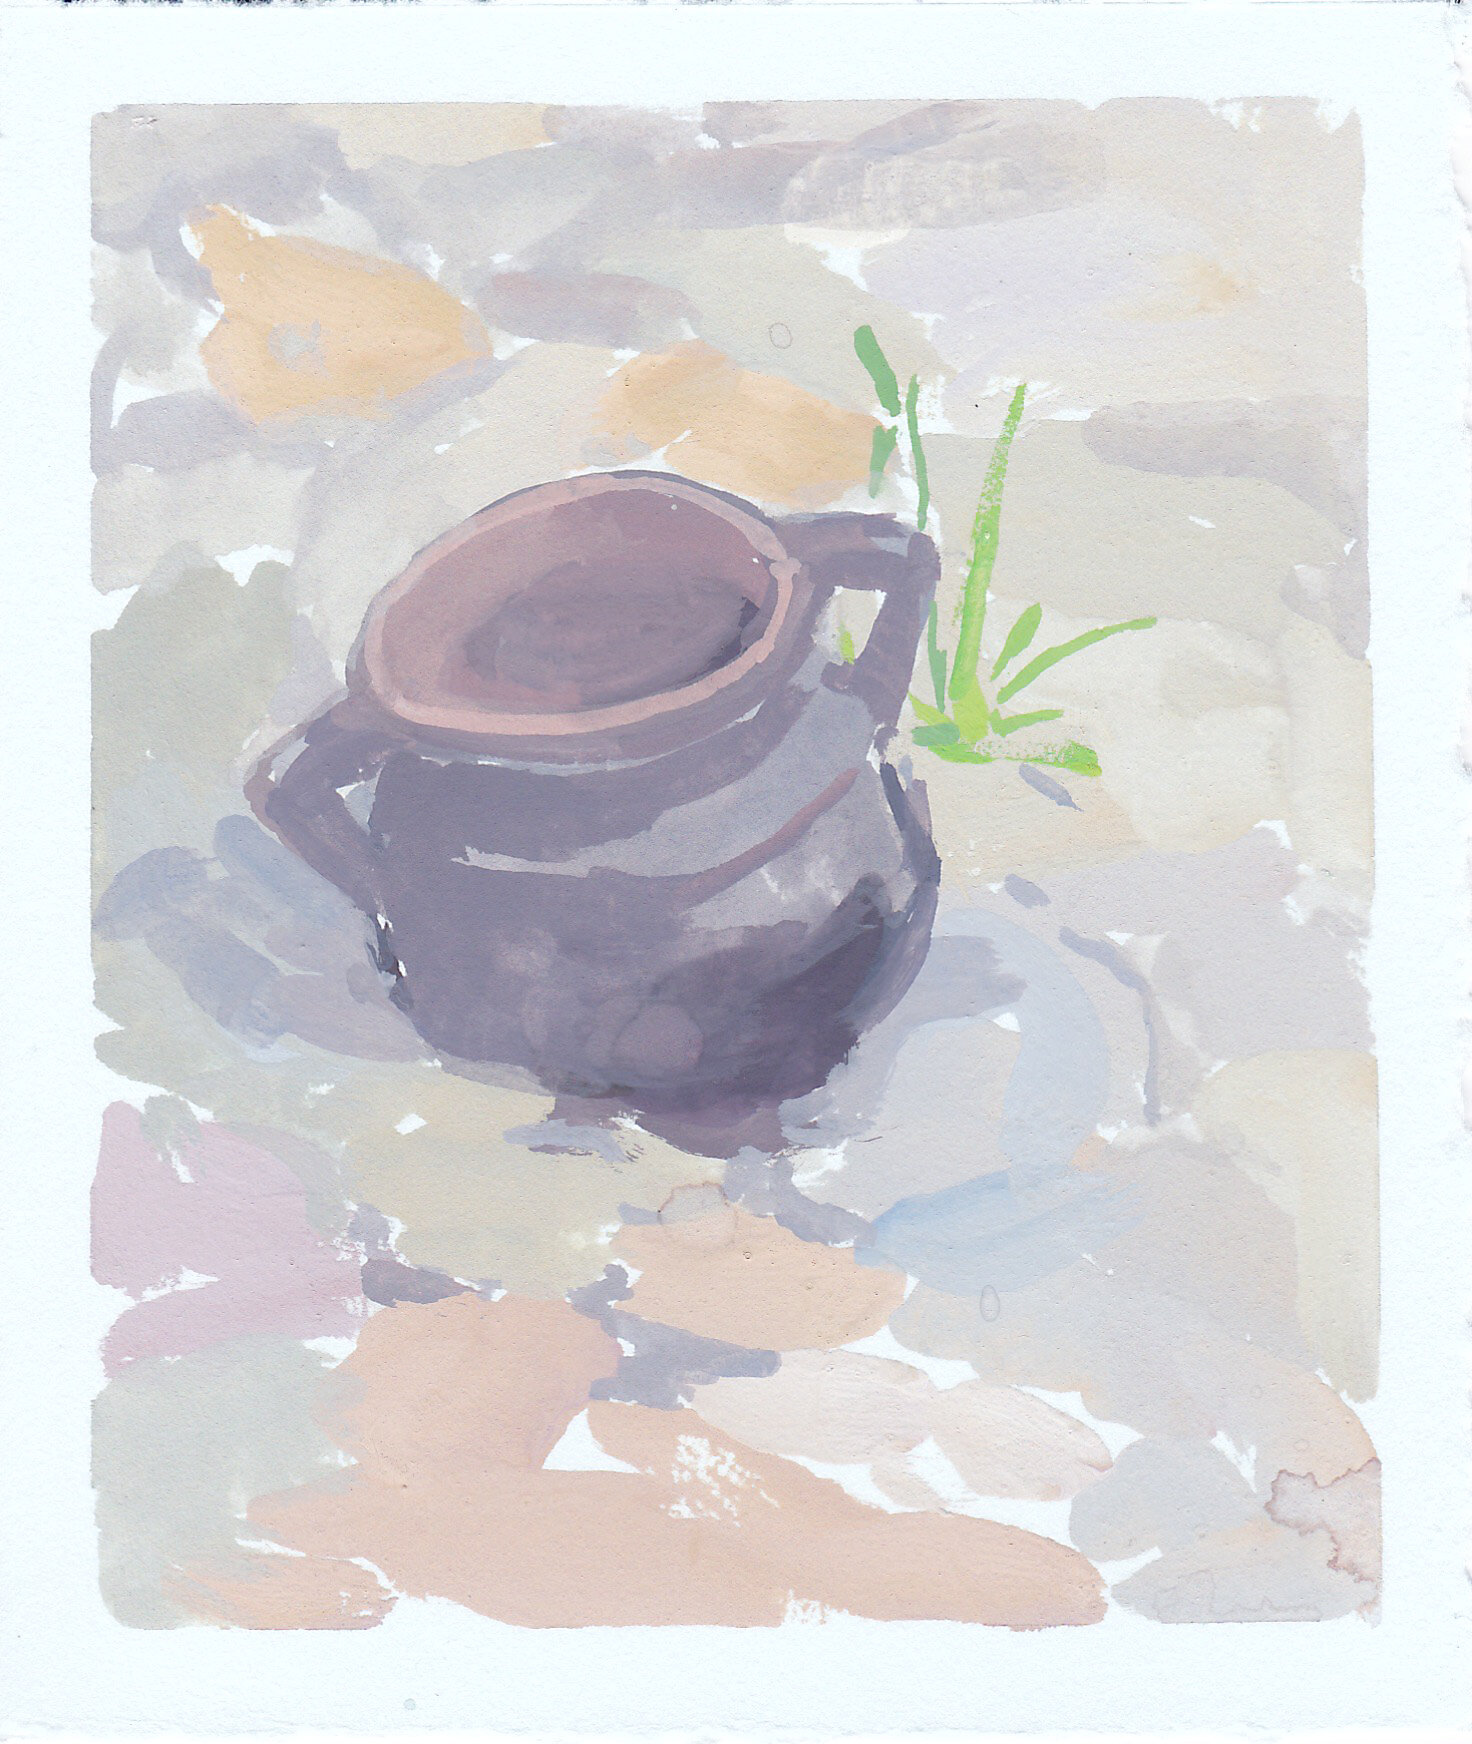    Water Vessel   gouache on paper 5" x 4.25" 2019  available by request 